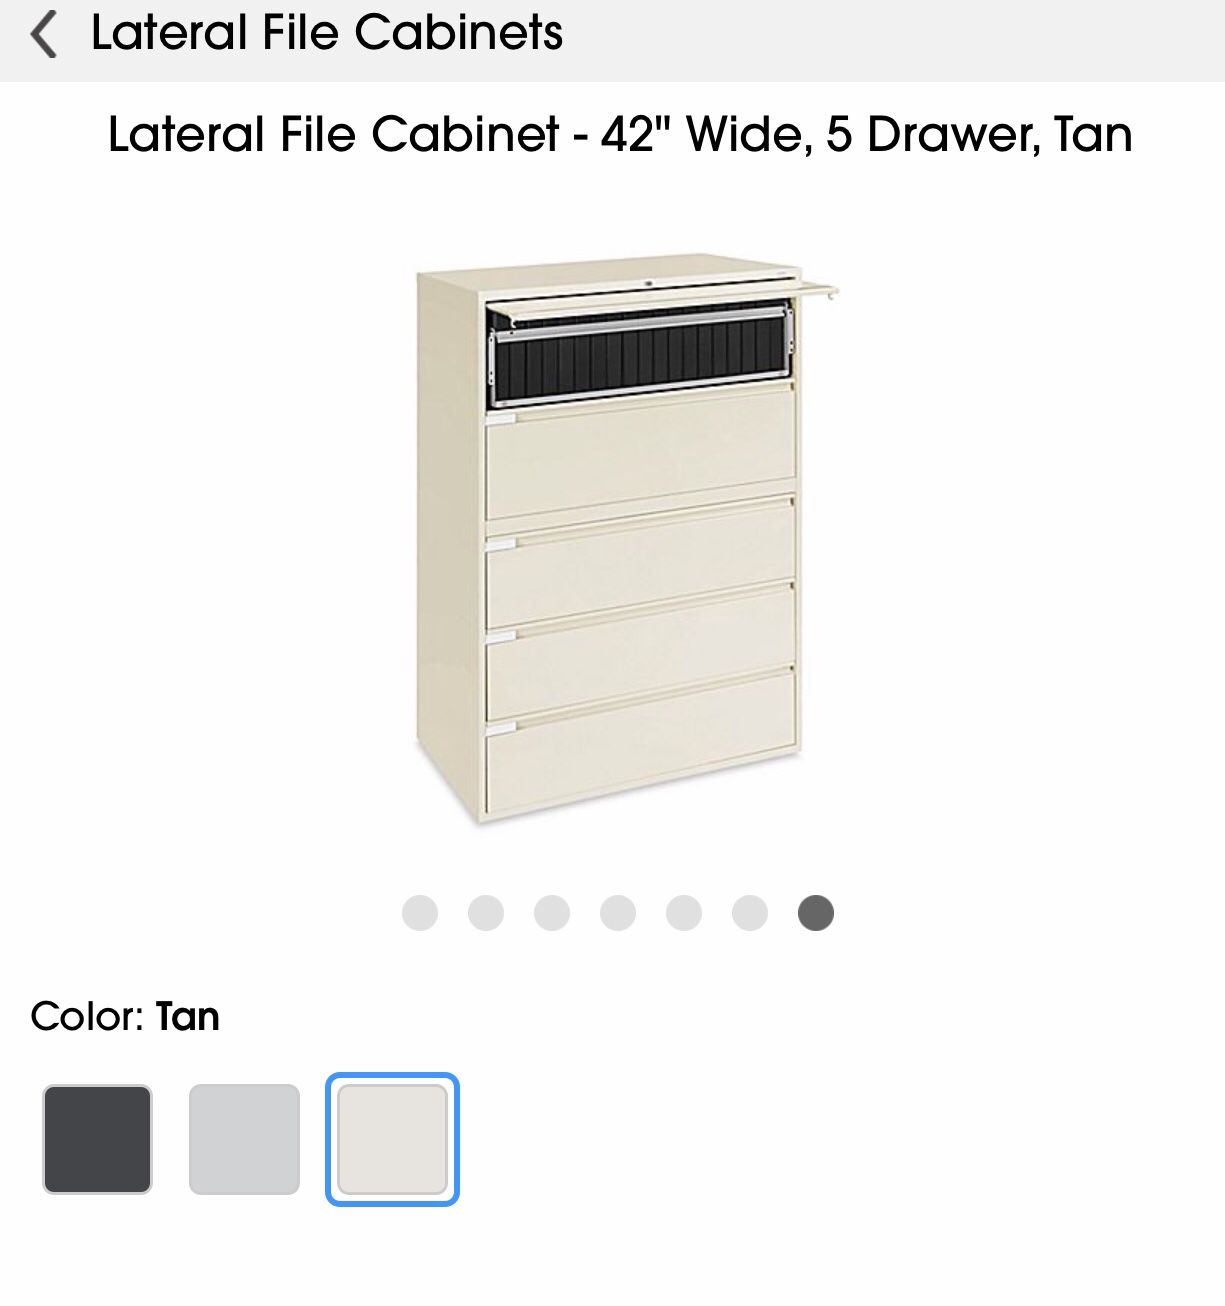 Lateral file cabinet, 5 drawers Tan. Can be use for home office or business.